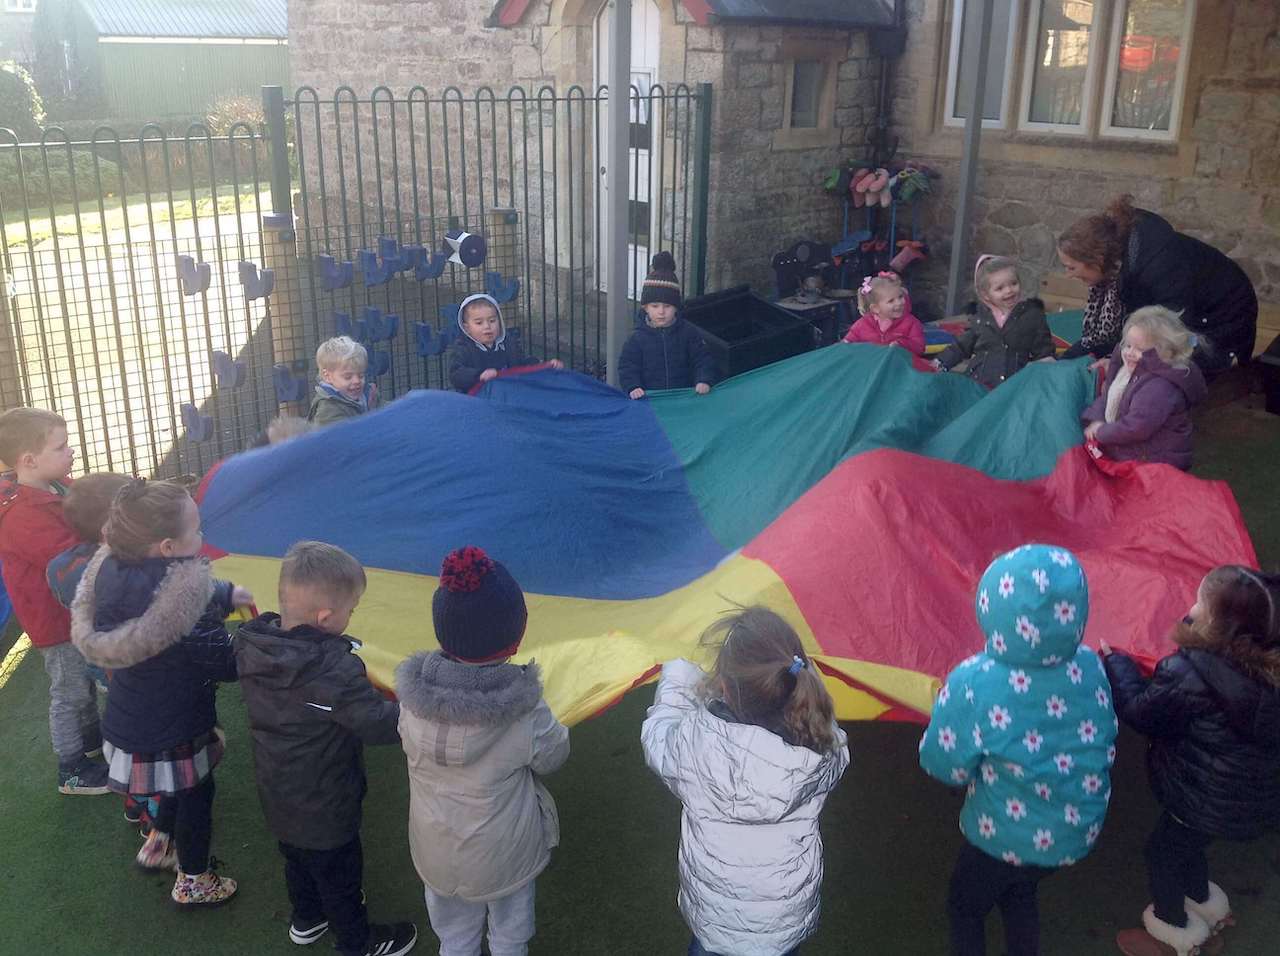 A group of children playing outside, with a colourful parachute.